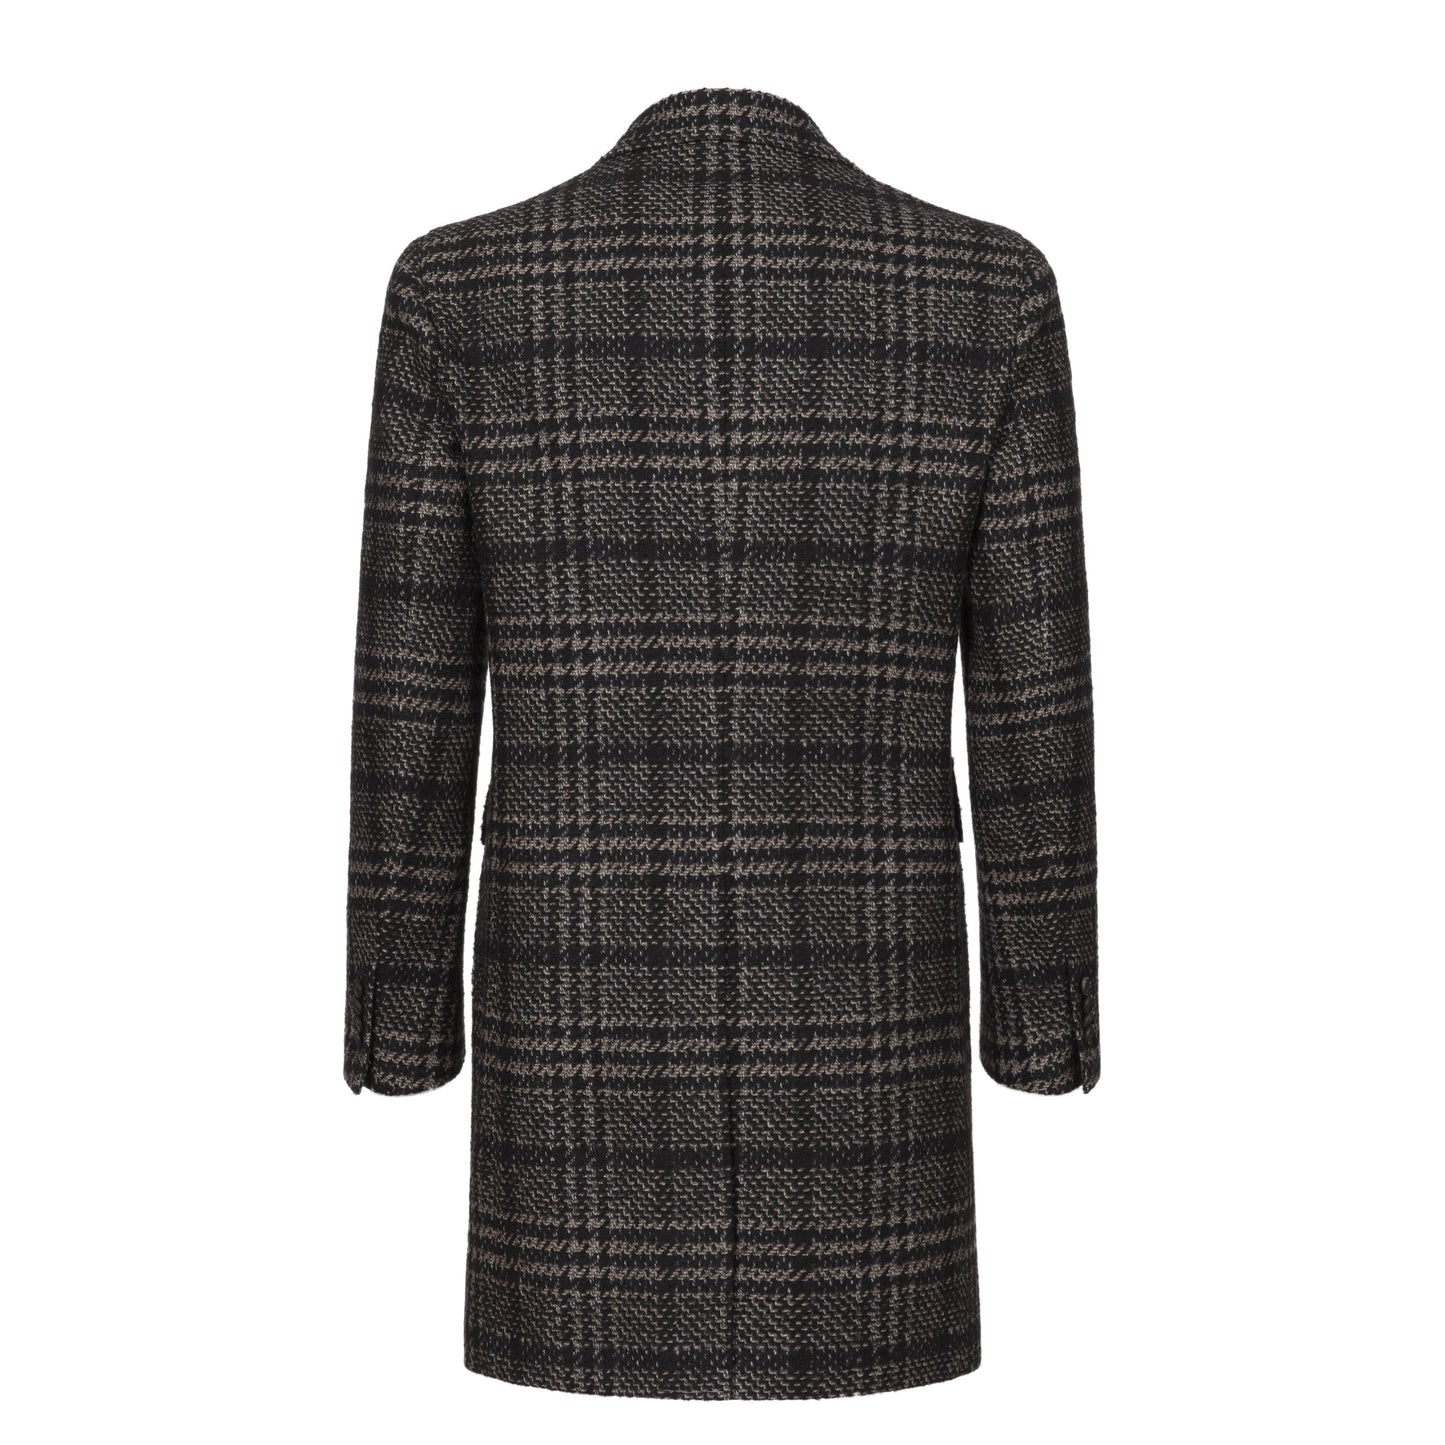 De Petrillo Single - Breasted Wool Coat in Black and Warm White. Exclusively Made for Sartale - SARTALE